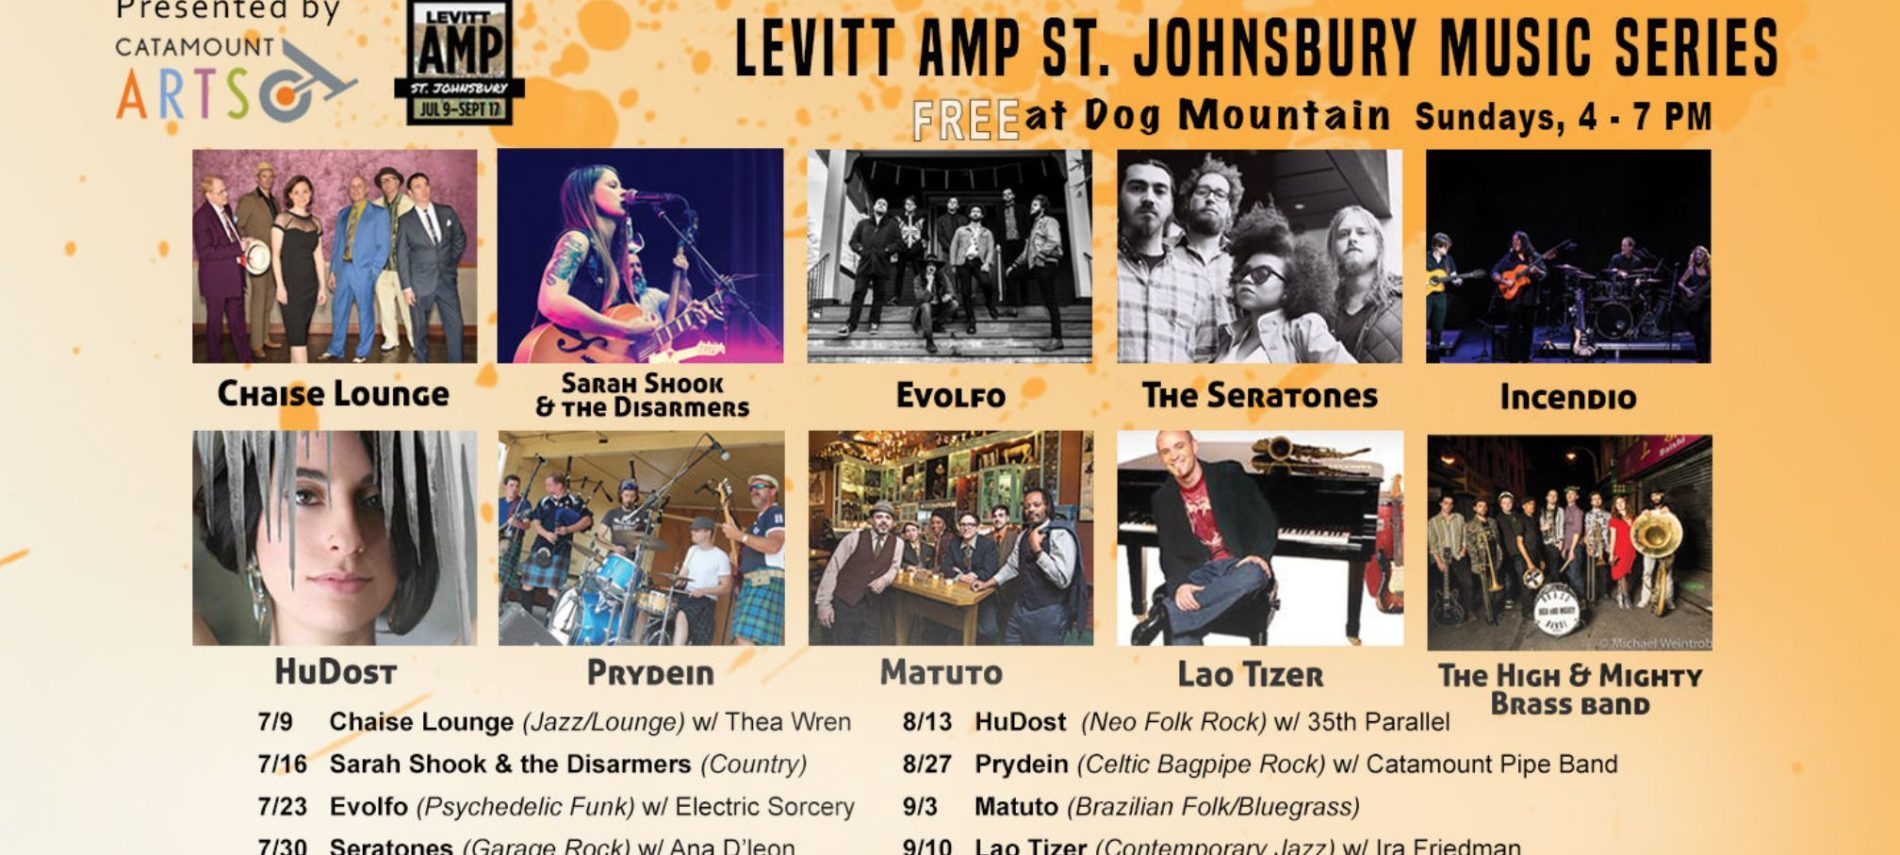 FREE Live Concerts at Dog Mountain in St. Johnsbury Vermont